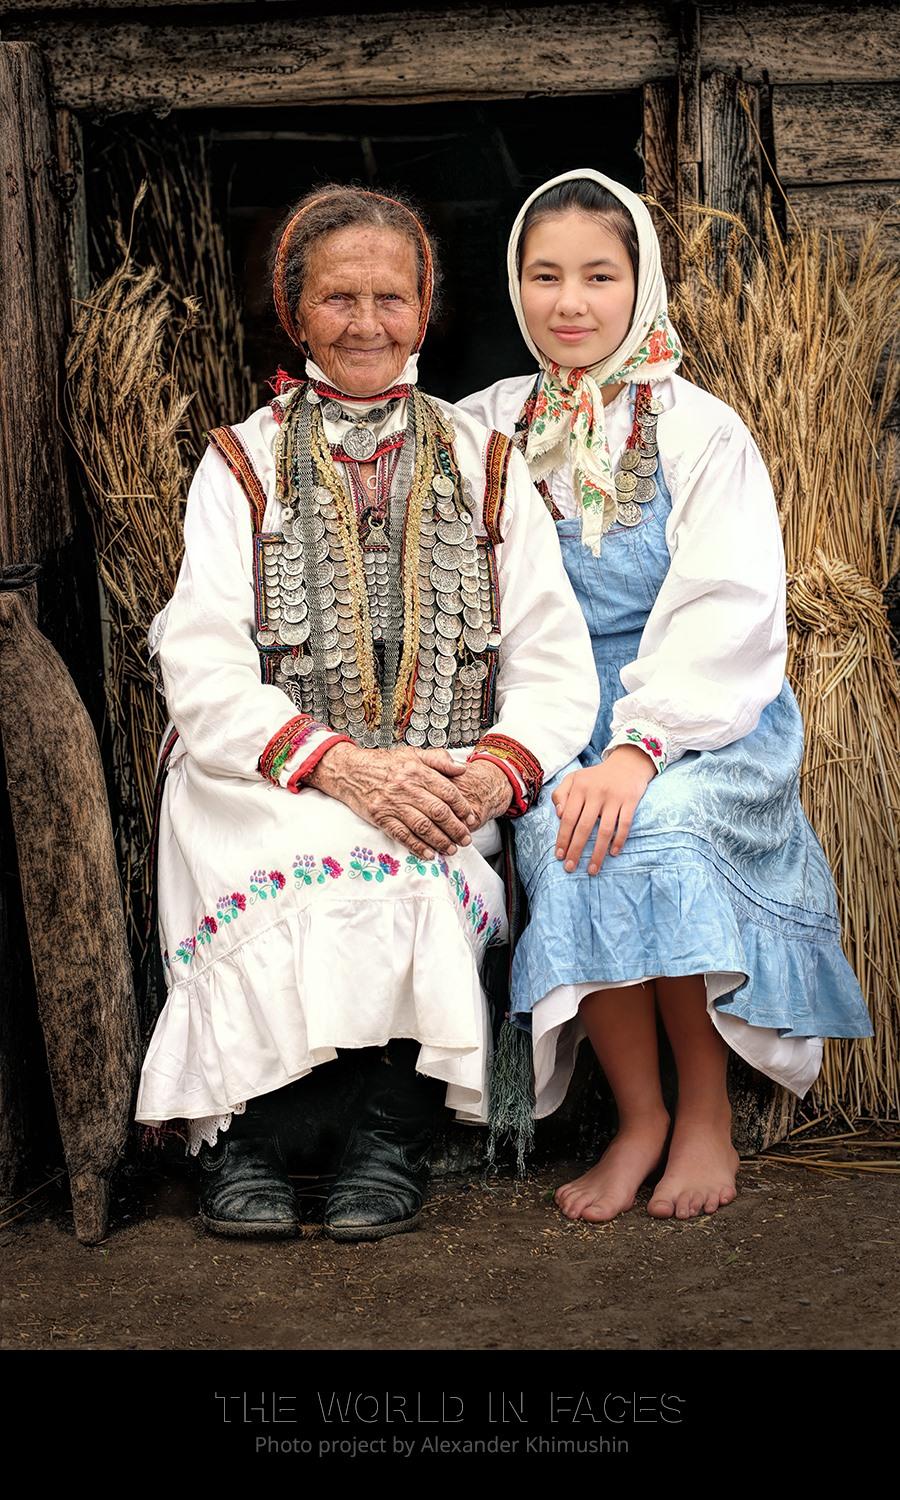 Chuvashi indigenous women from Urabagasy Village, Eterne, the Chuvash Republic (© <a href="https://www.facebook.com/xperimenter">Alexander Khimushin</a> / The World In Faces)